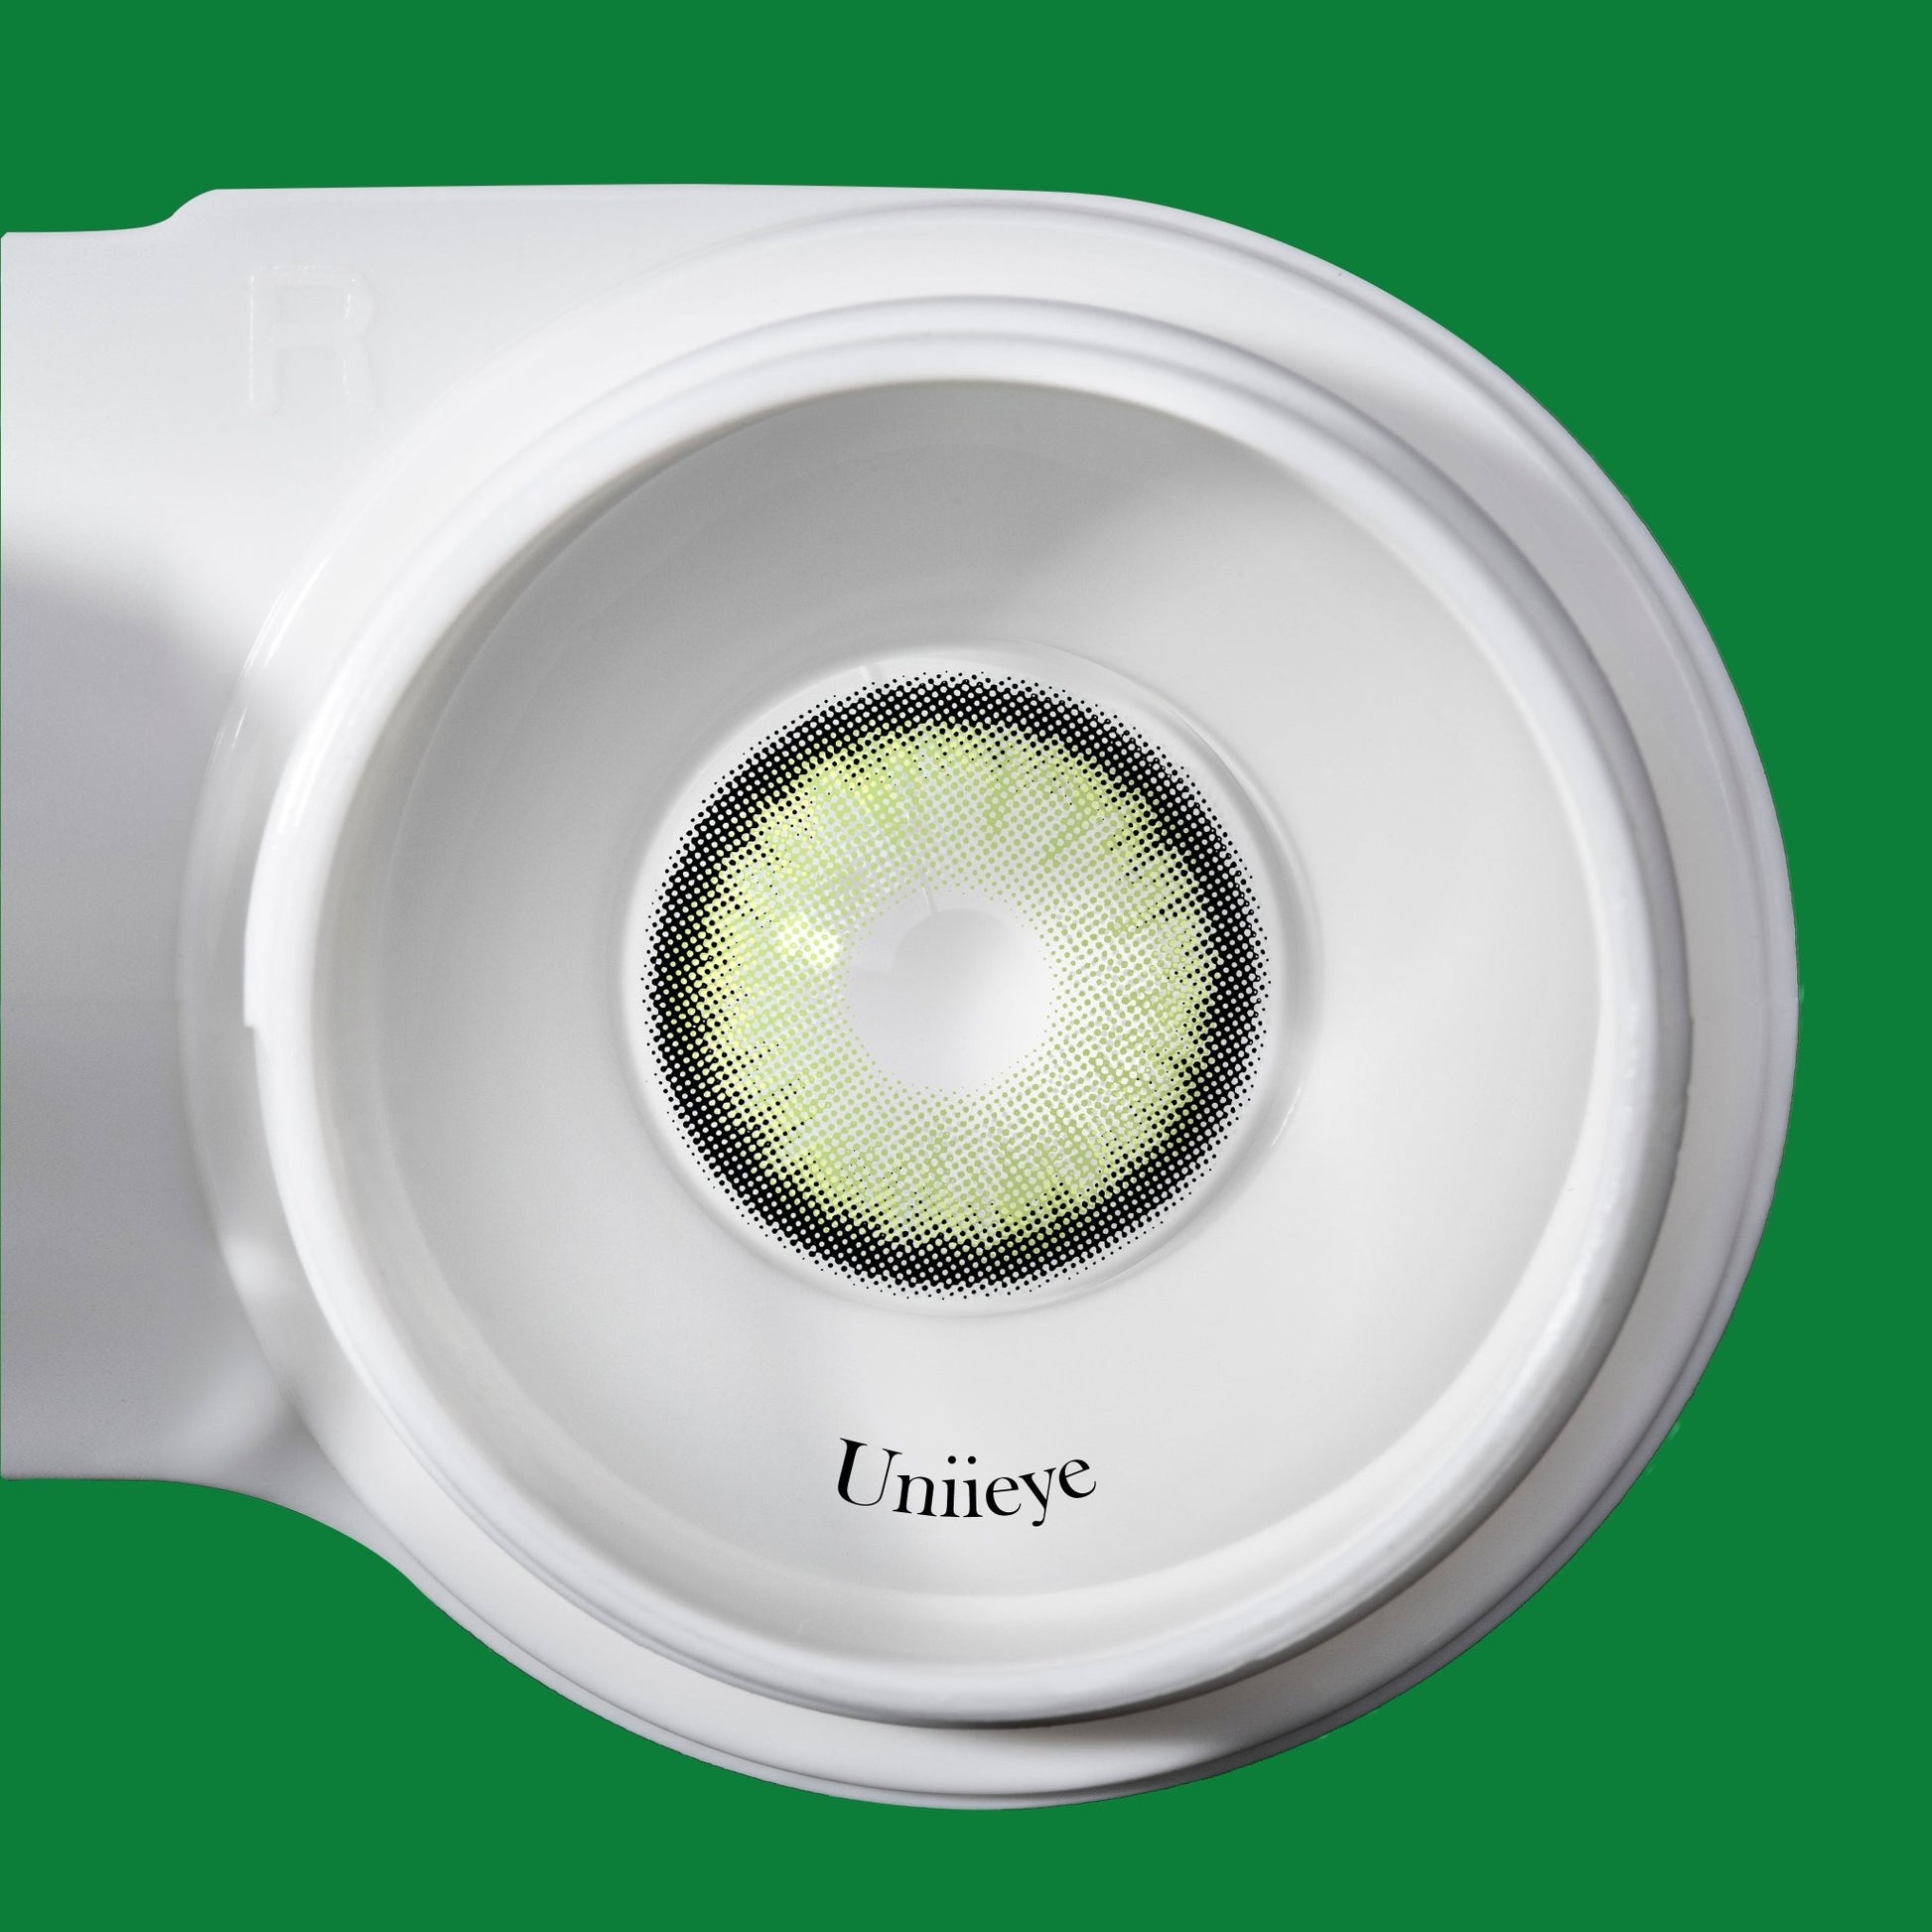 Dawn Green Colored Contact Lenses - Uniieye